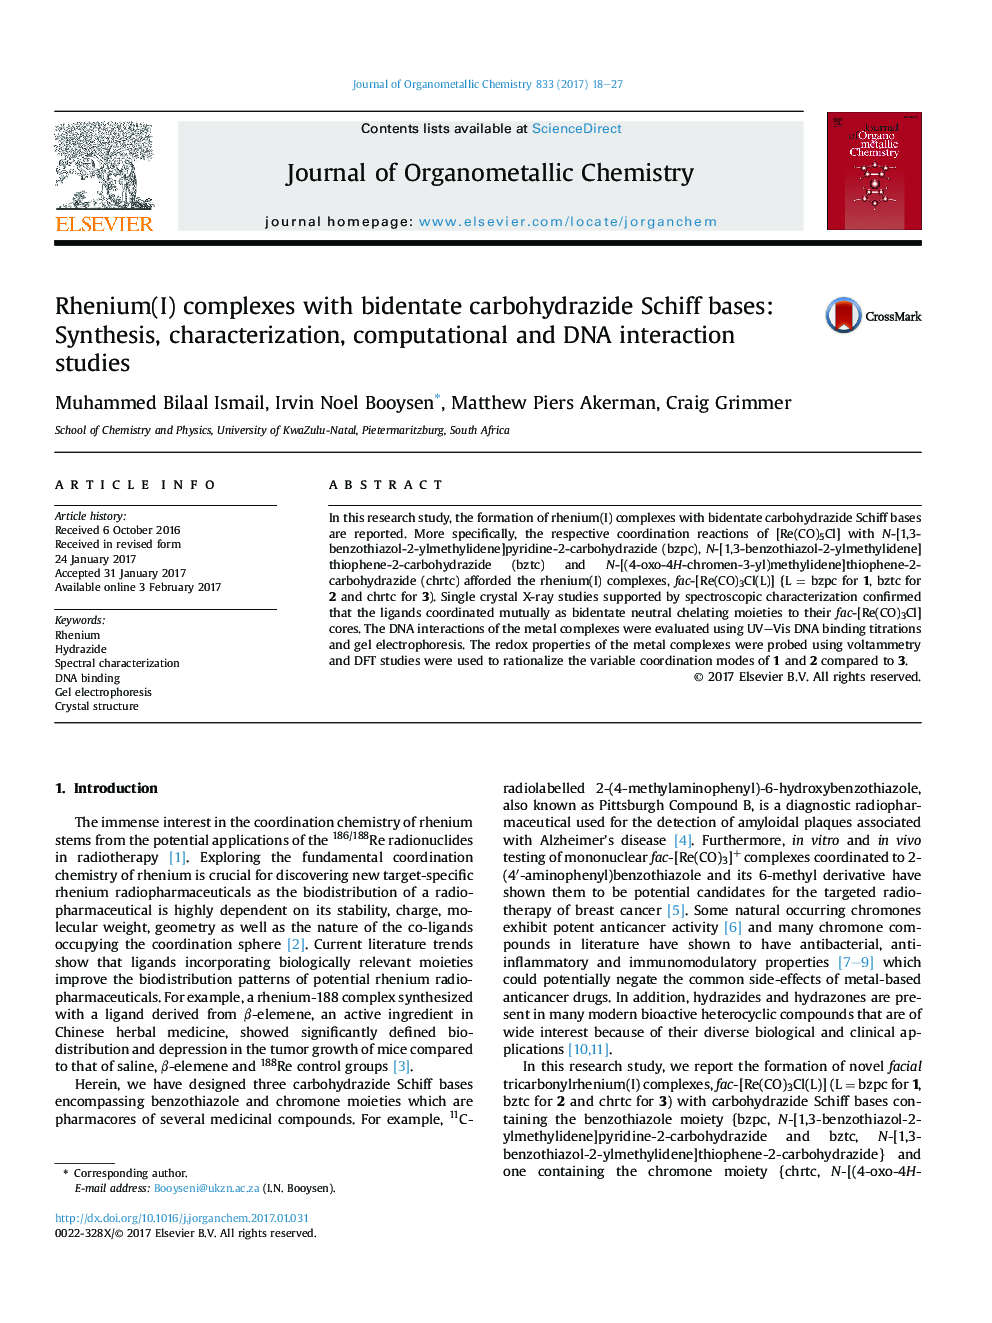 Rhenium(I) complexes with bidentate carbohydrazide Schiff bases: Synthesis, characterization, computational and DNA interaction studies